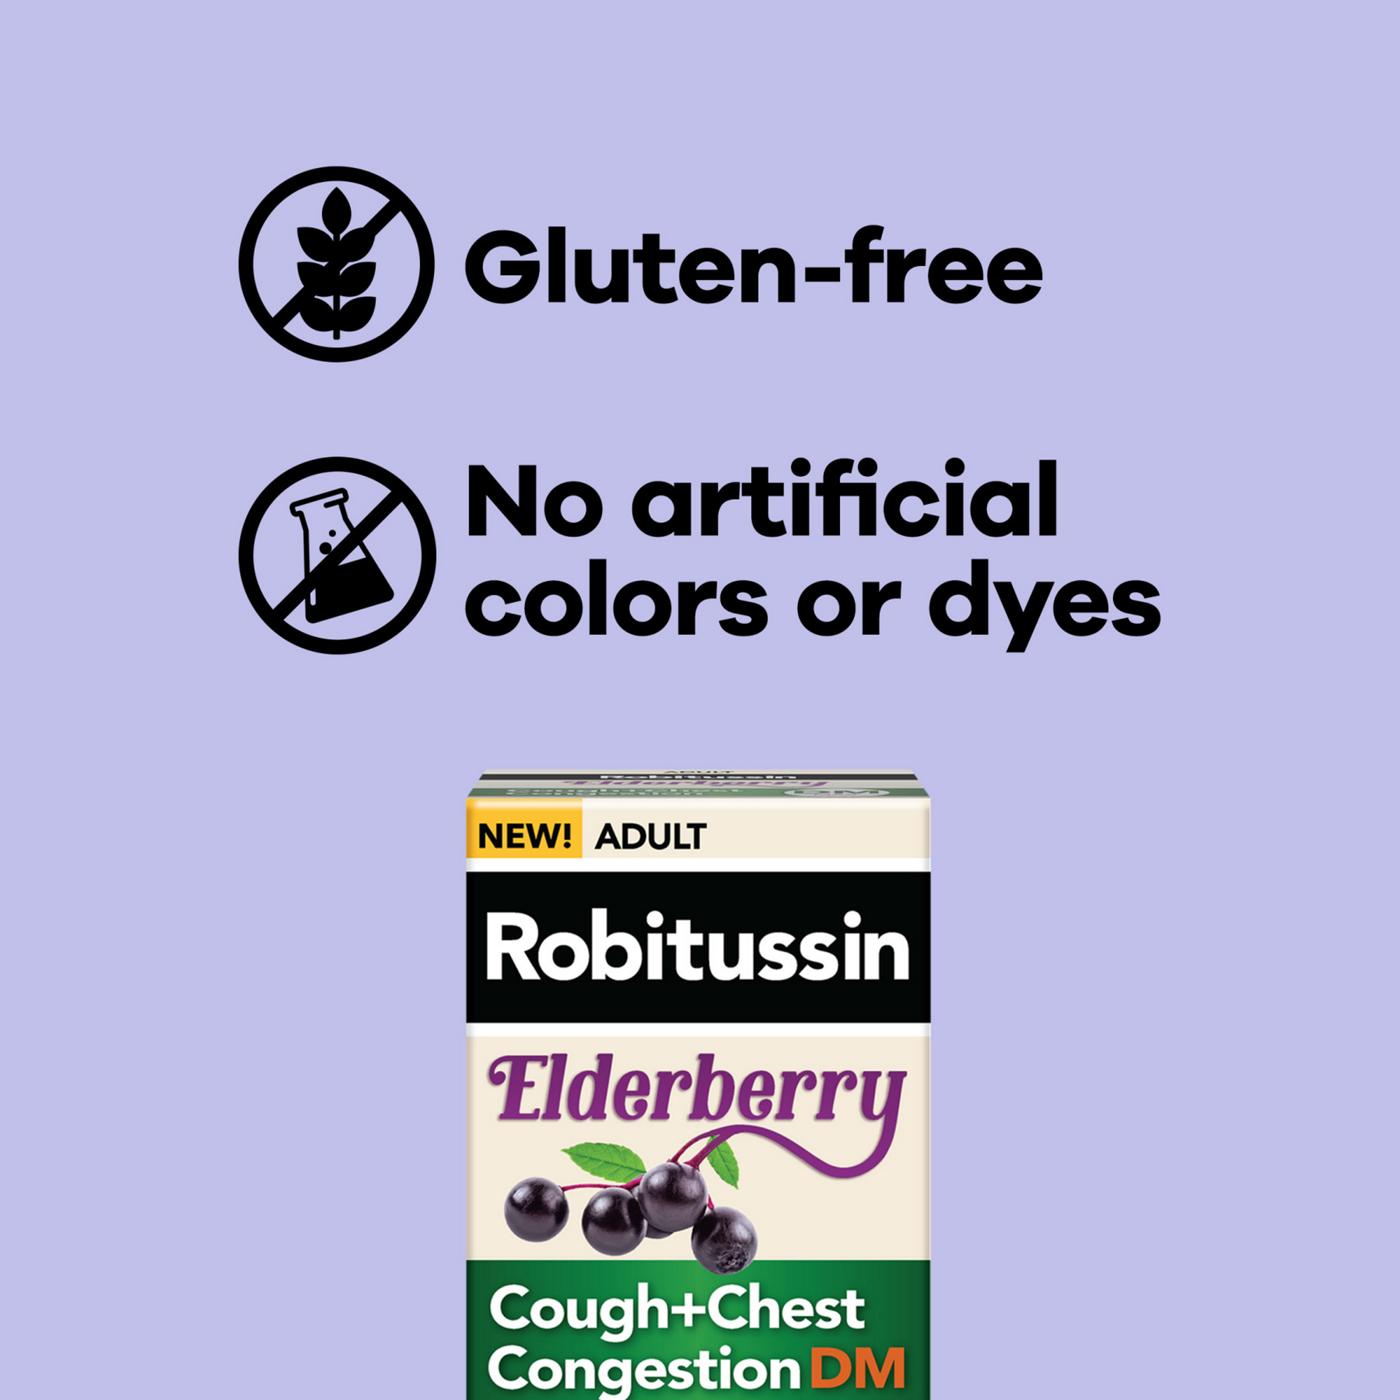 Robitussin Elderberry Cough + Chest Congestion DM Syrup; image 8 of 8